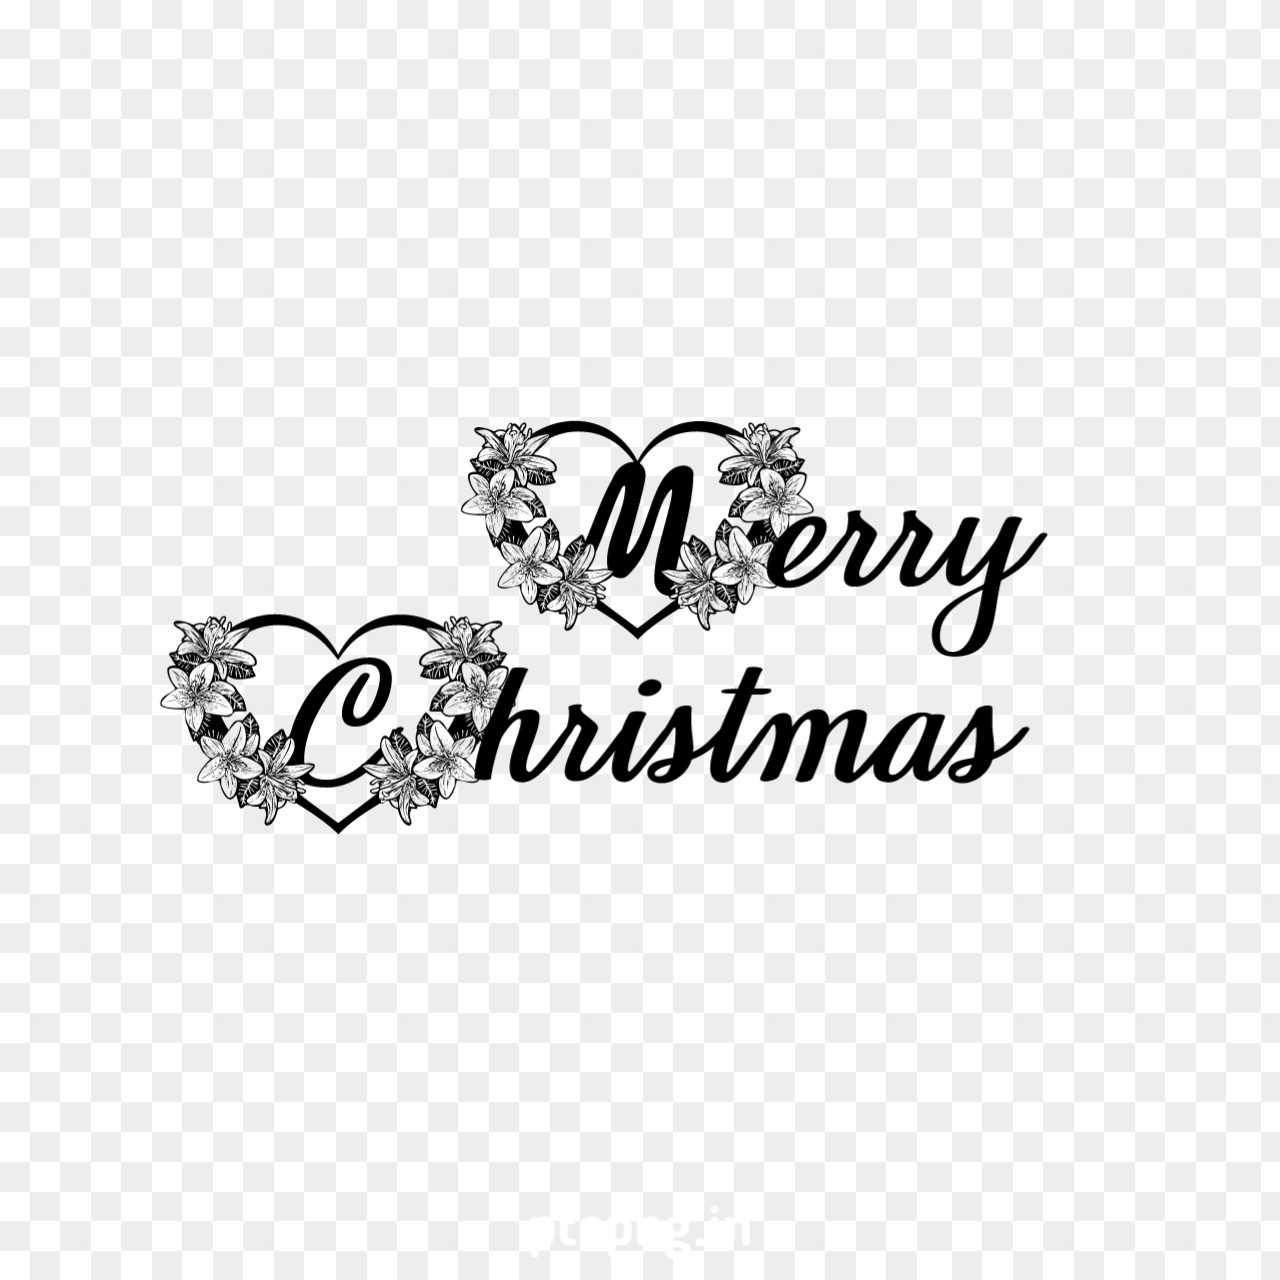 Merry christmas text PNG images 